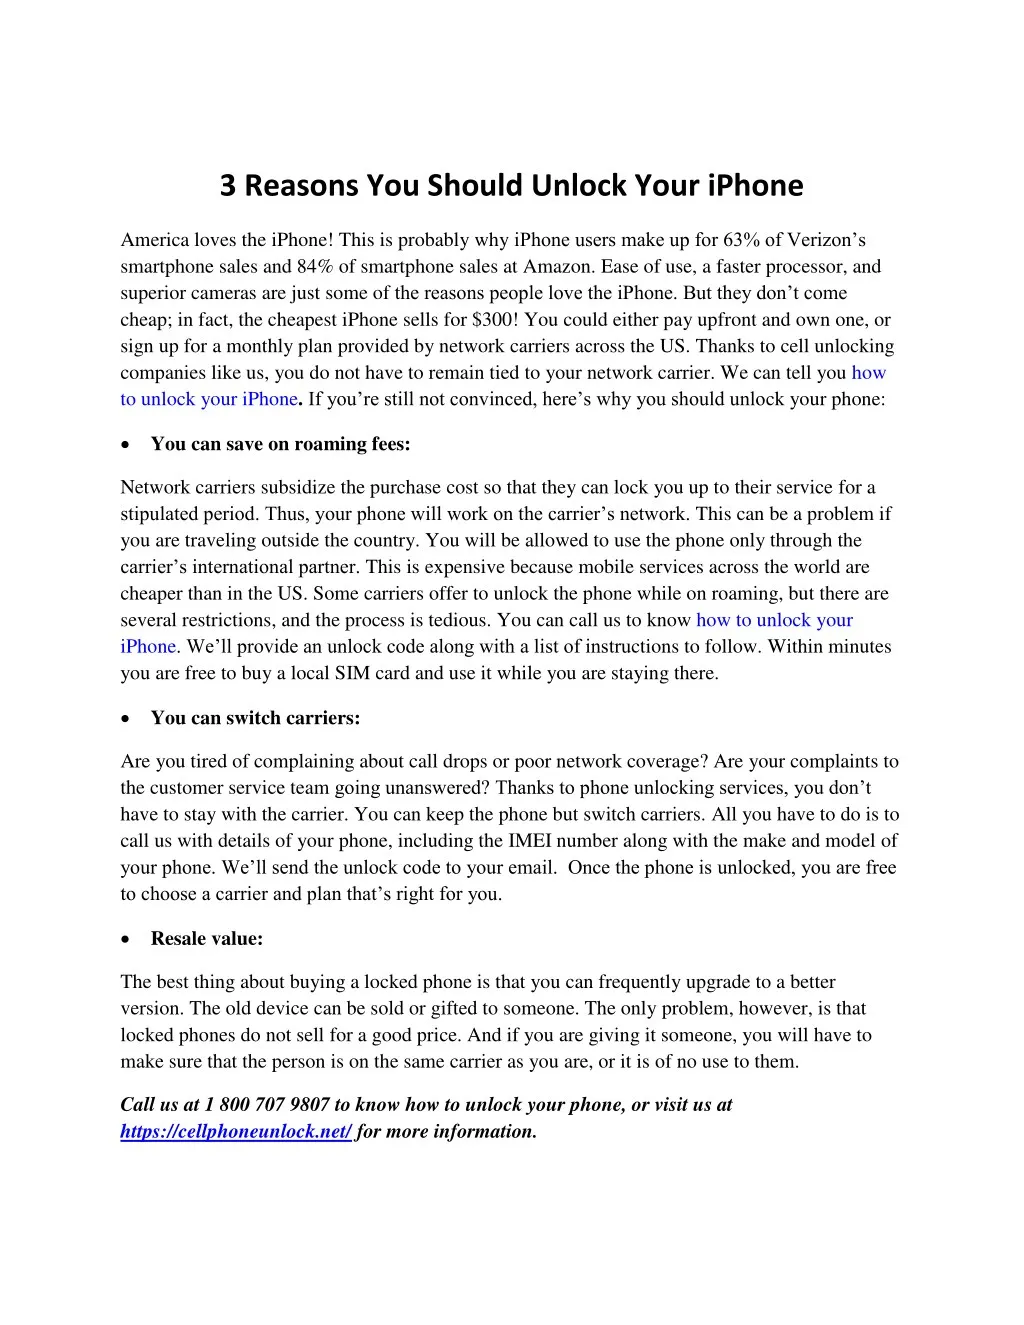 3 reasons you should unlock your iphone